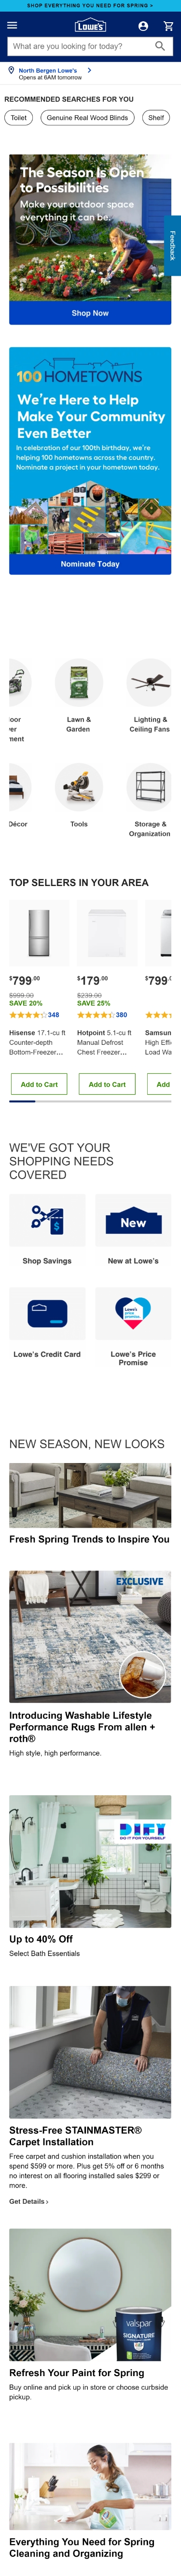 lowes homepage mobile